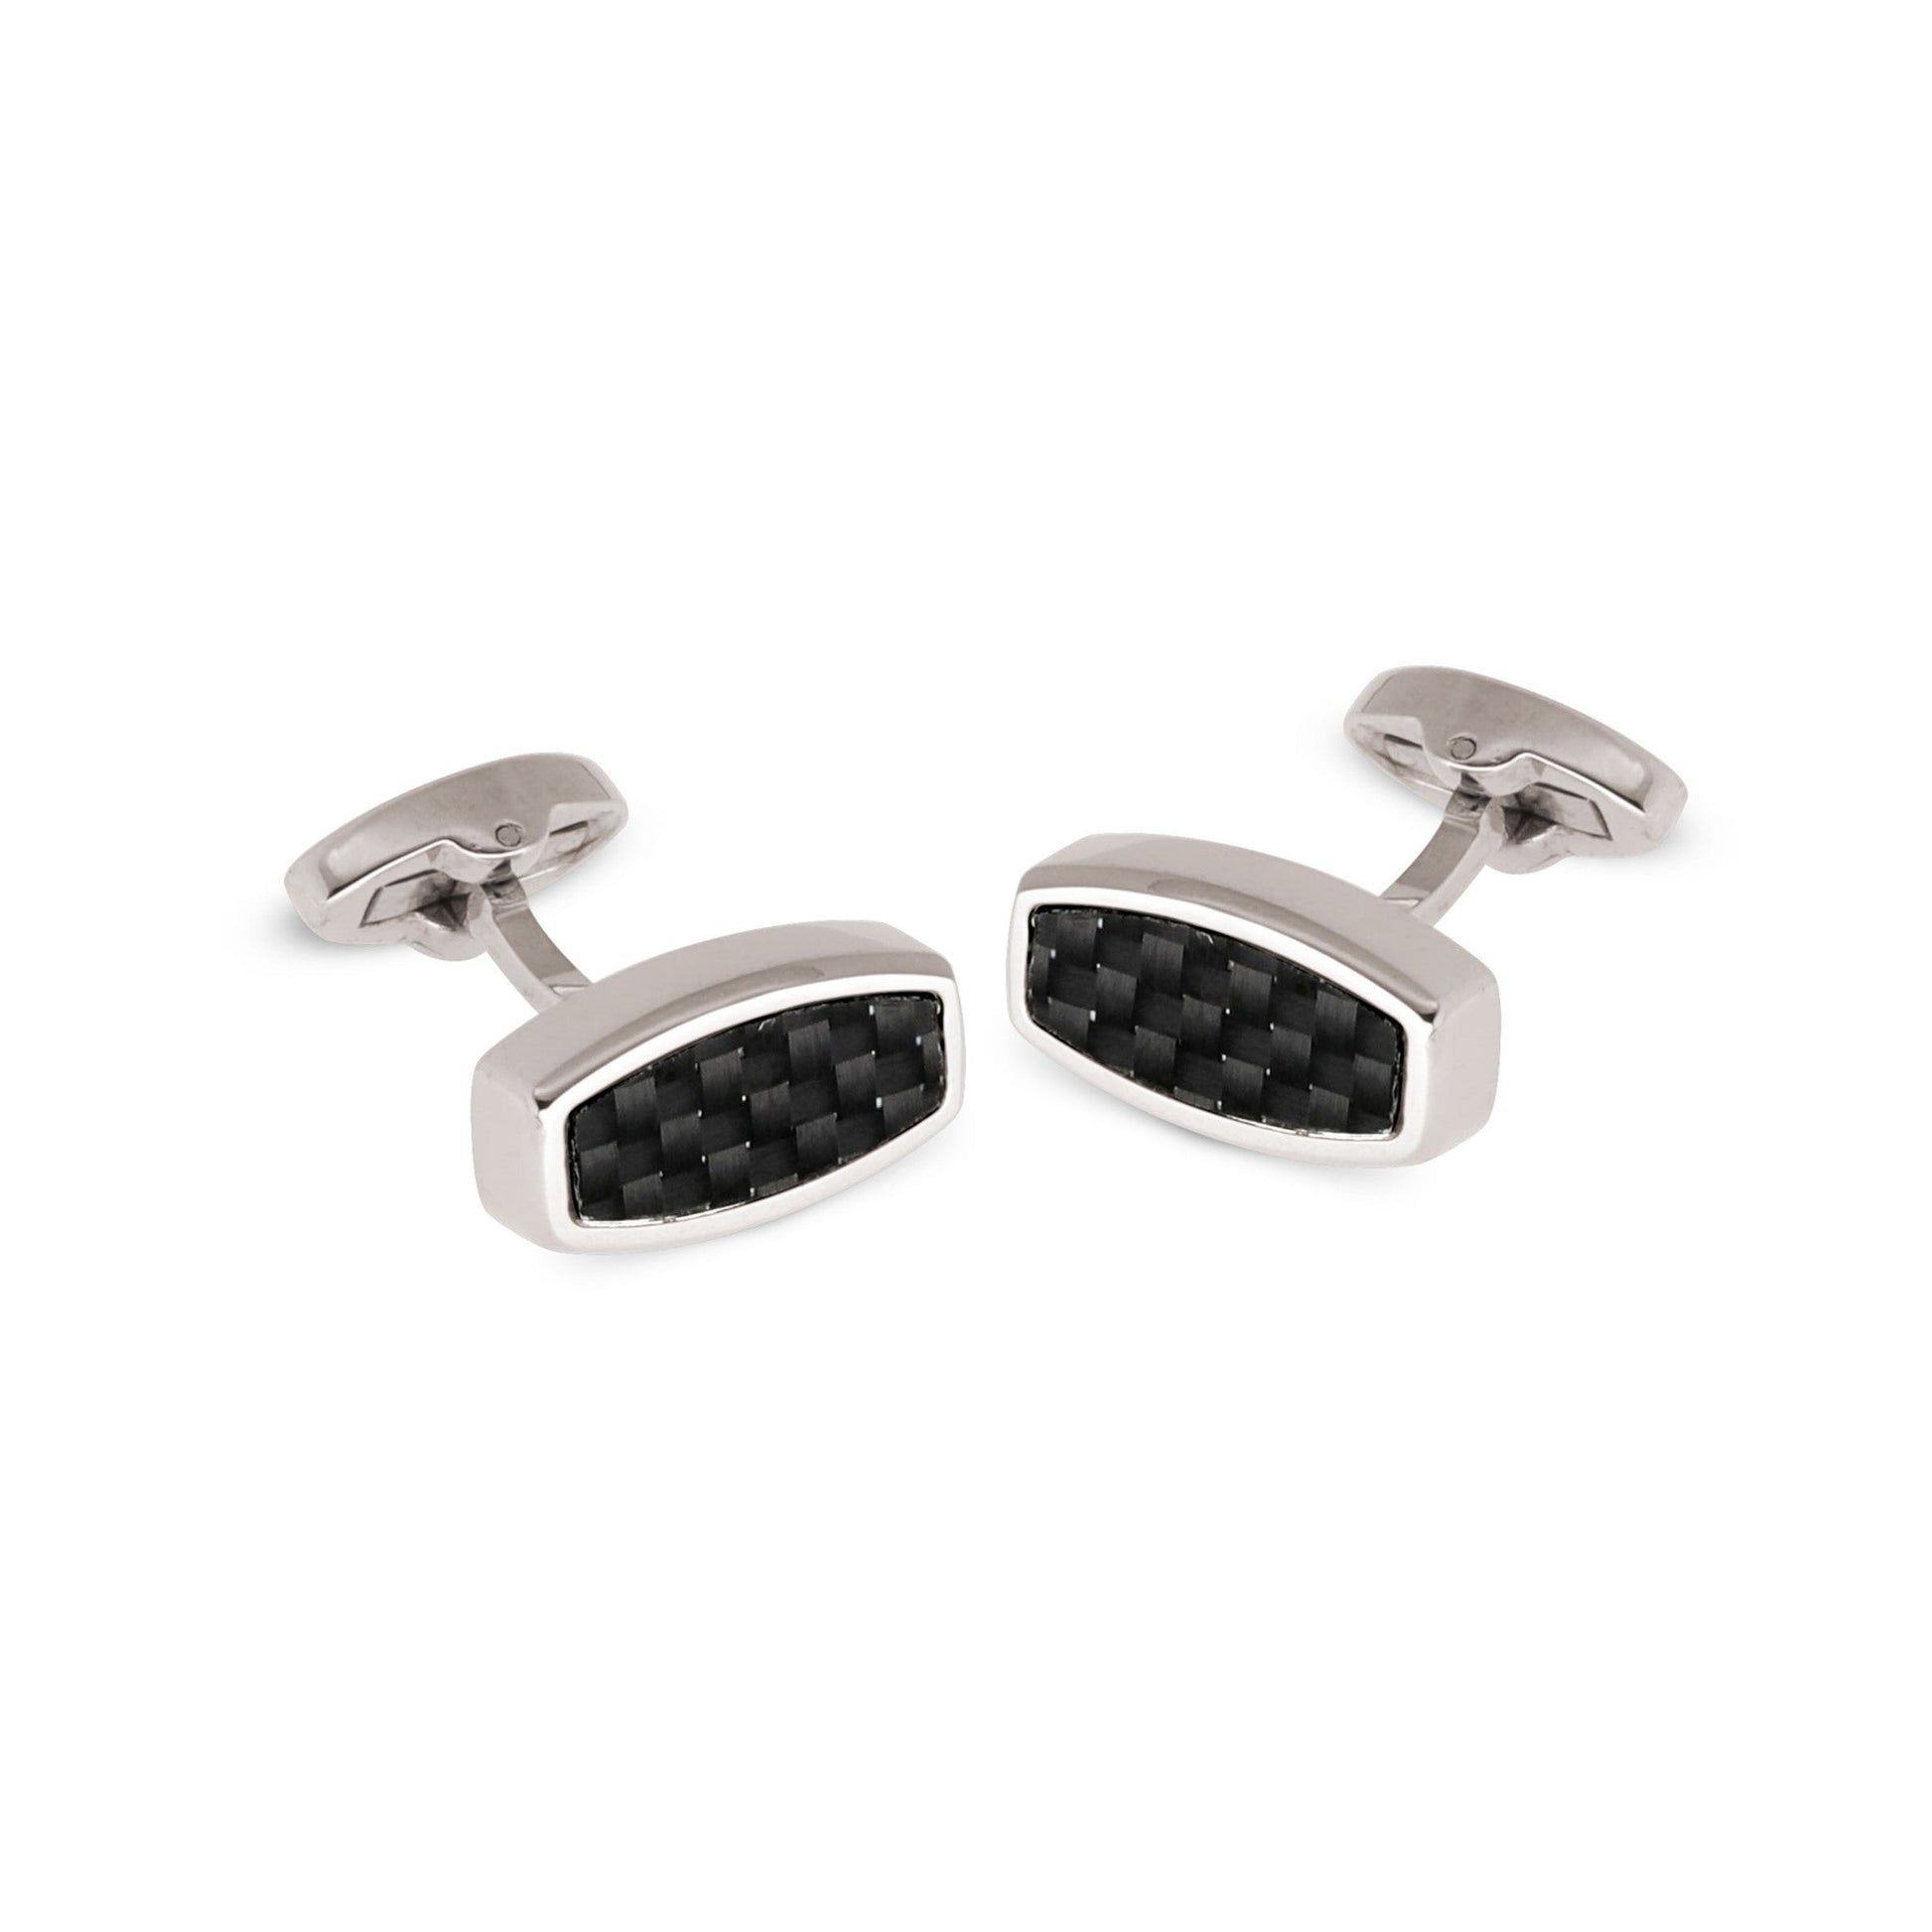 A stainless steel & black carbon fiber cufflinks displayed on a neutral white background.